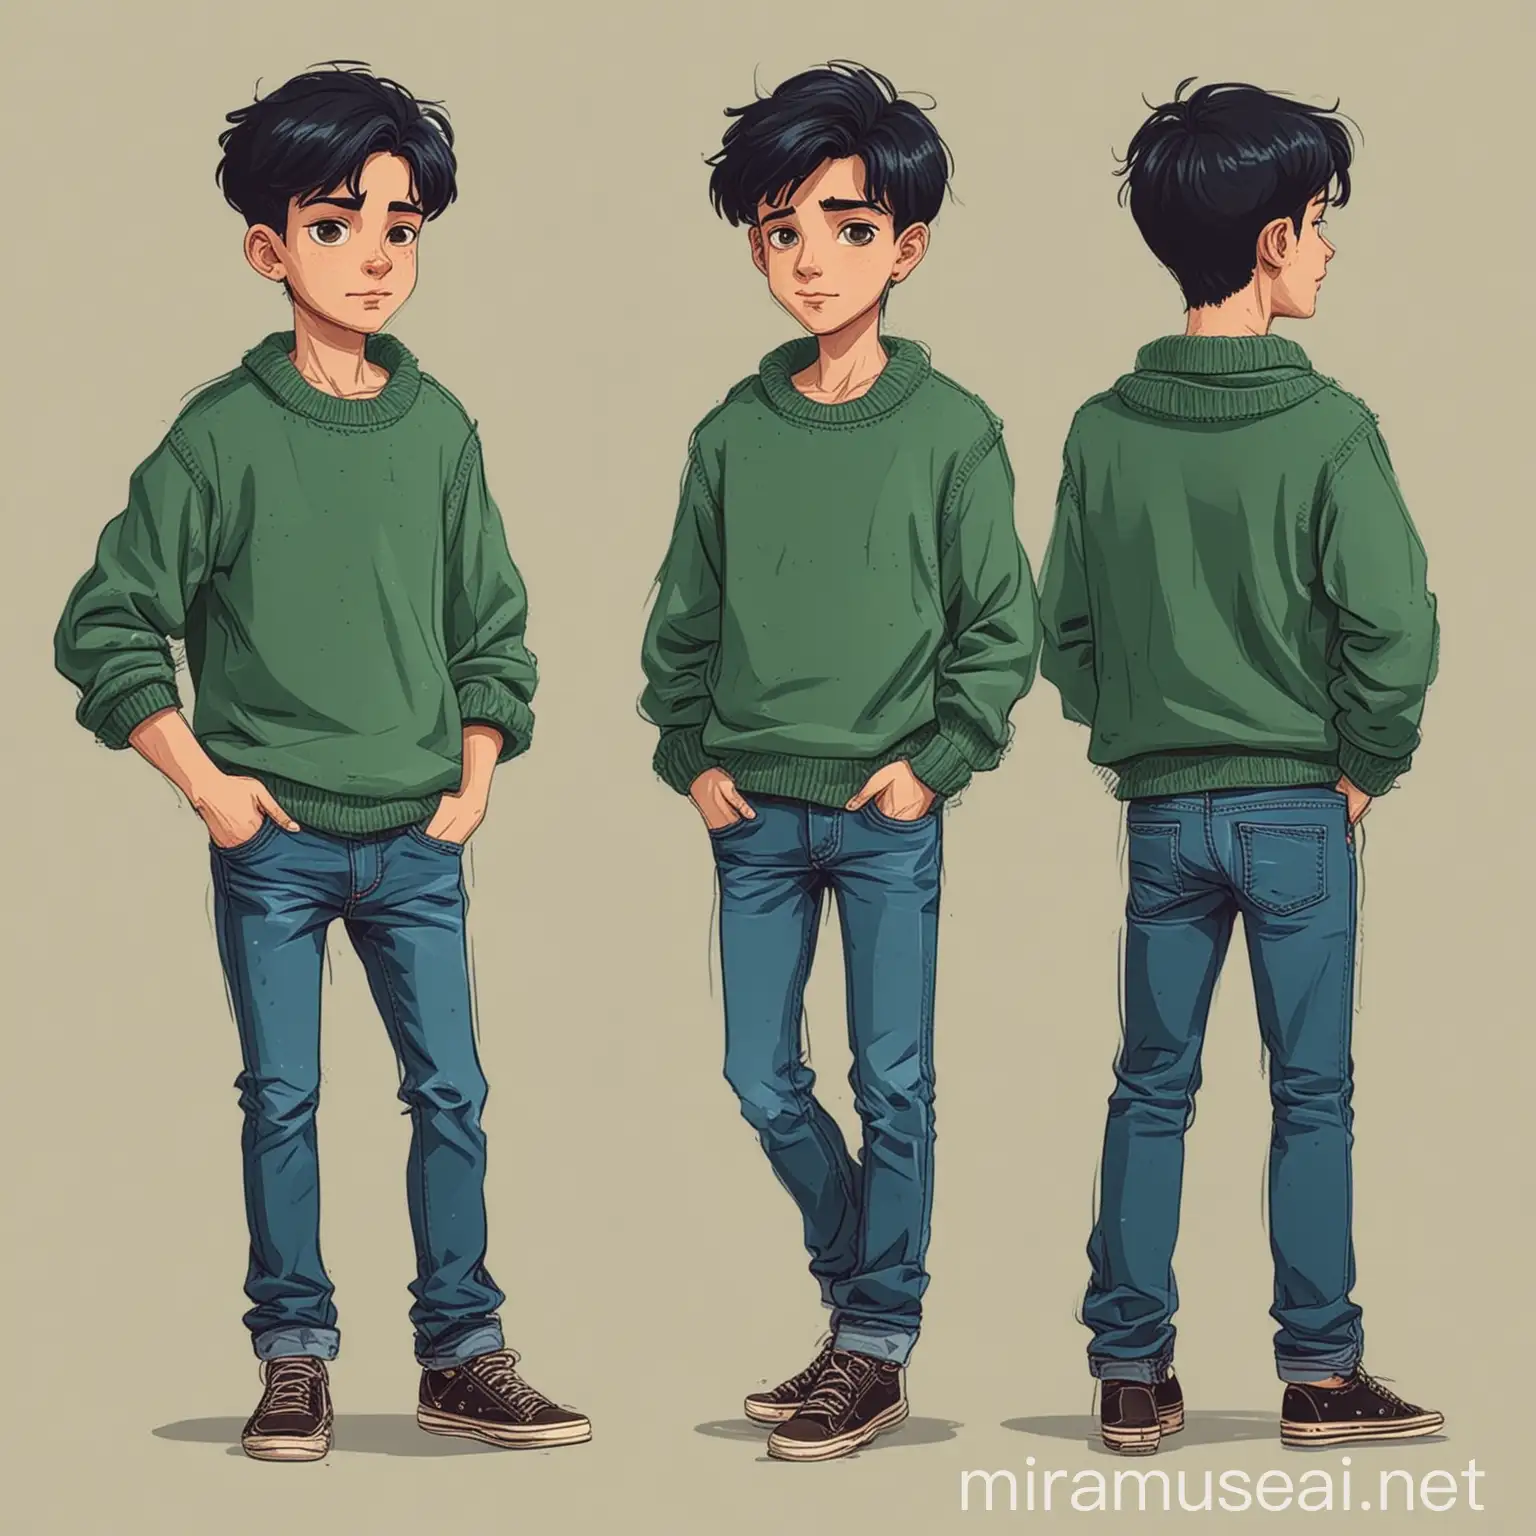 Boy in Green Sweater and Blue Jeans Flat Vector Style Character Illustration